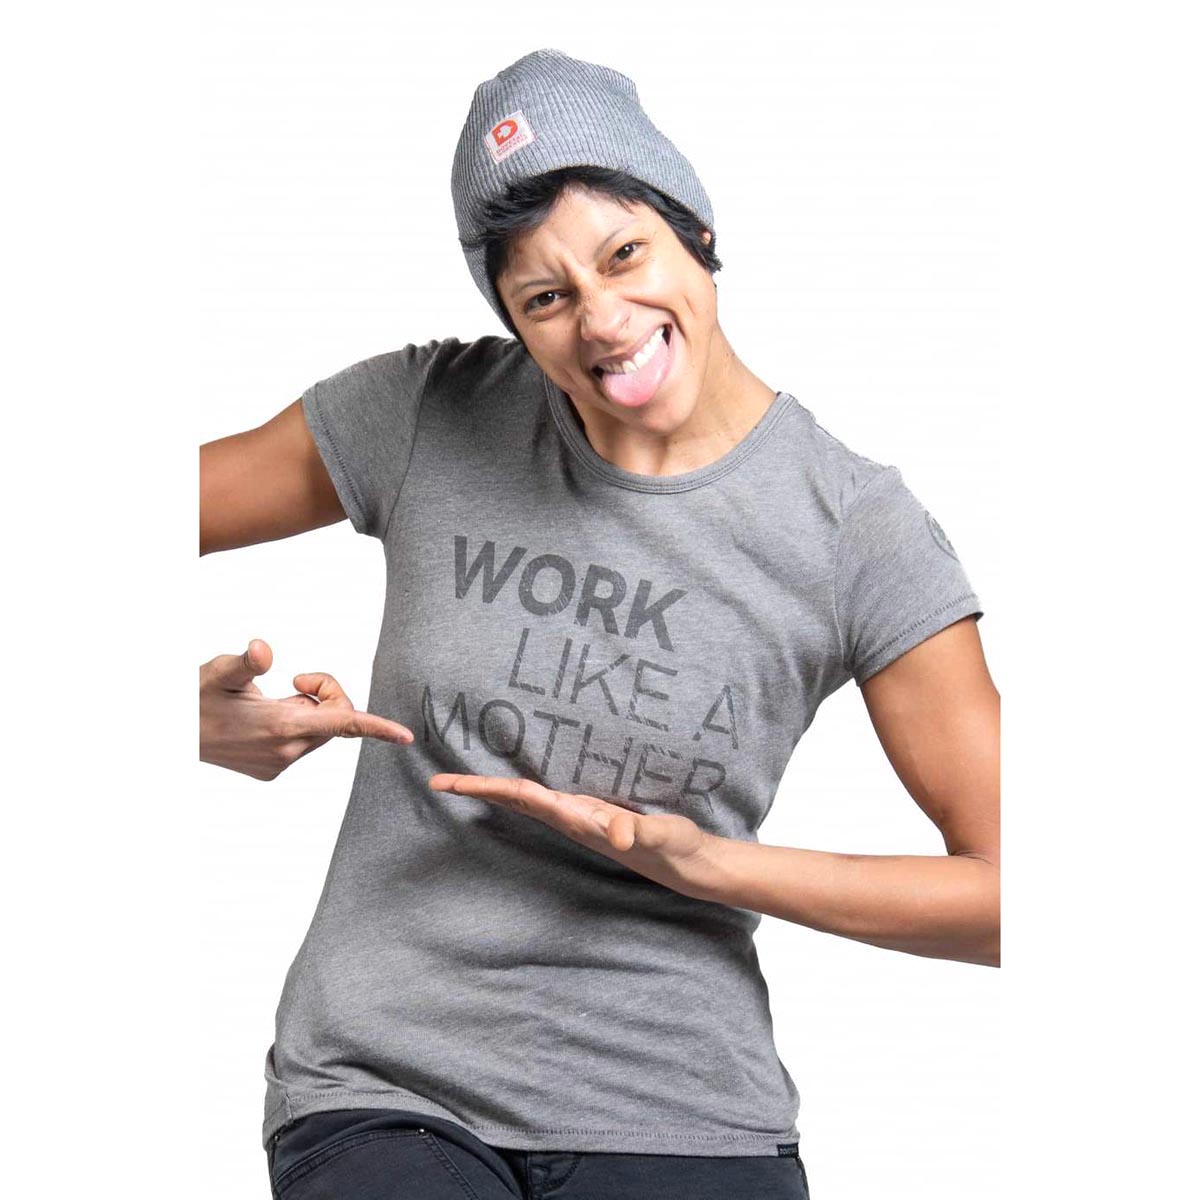 Dovetail Workwear Women's Work Like a Mother Crew Neck Tee